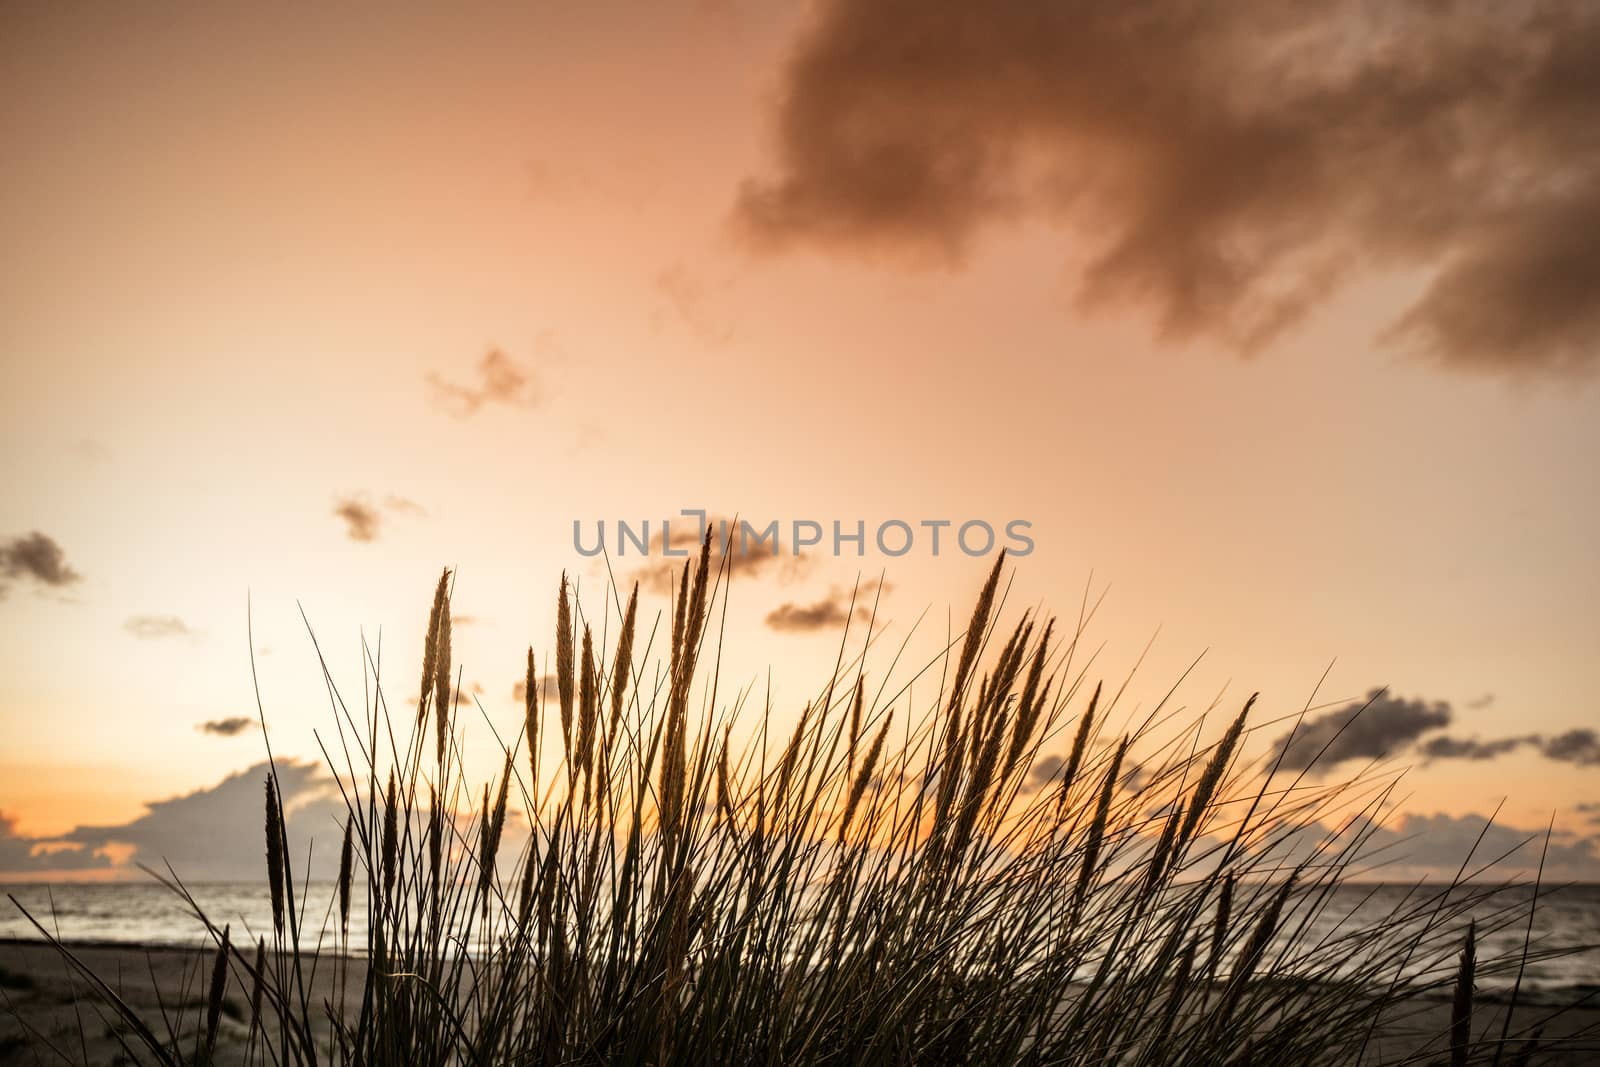 Sunset by the ocean with reed silhouettes in front of the sea at dawn